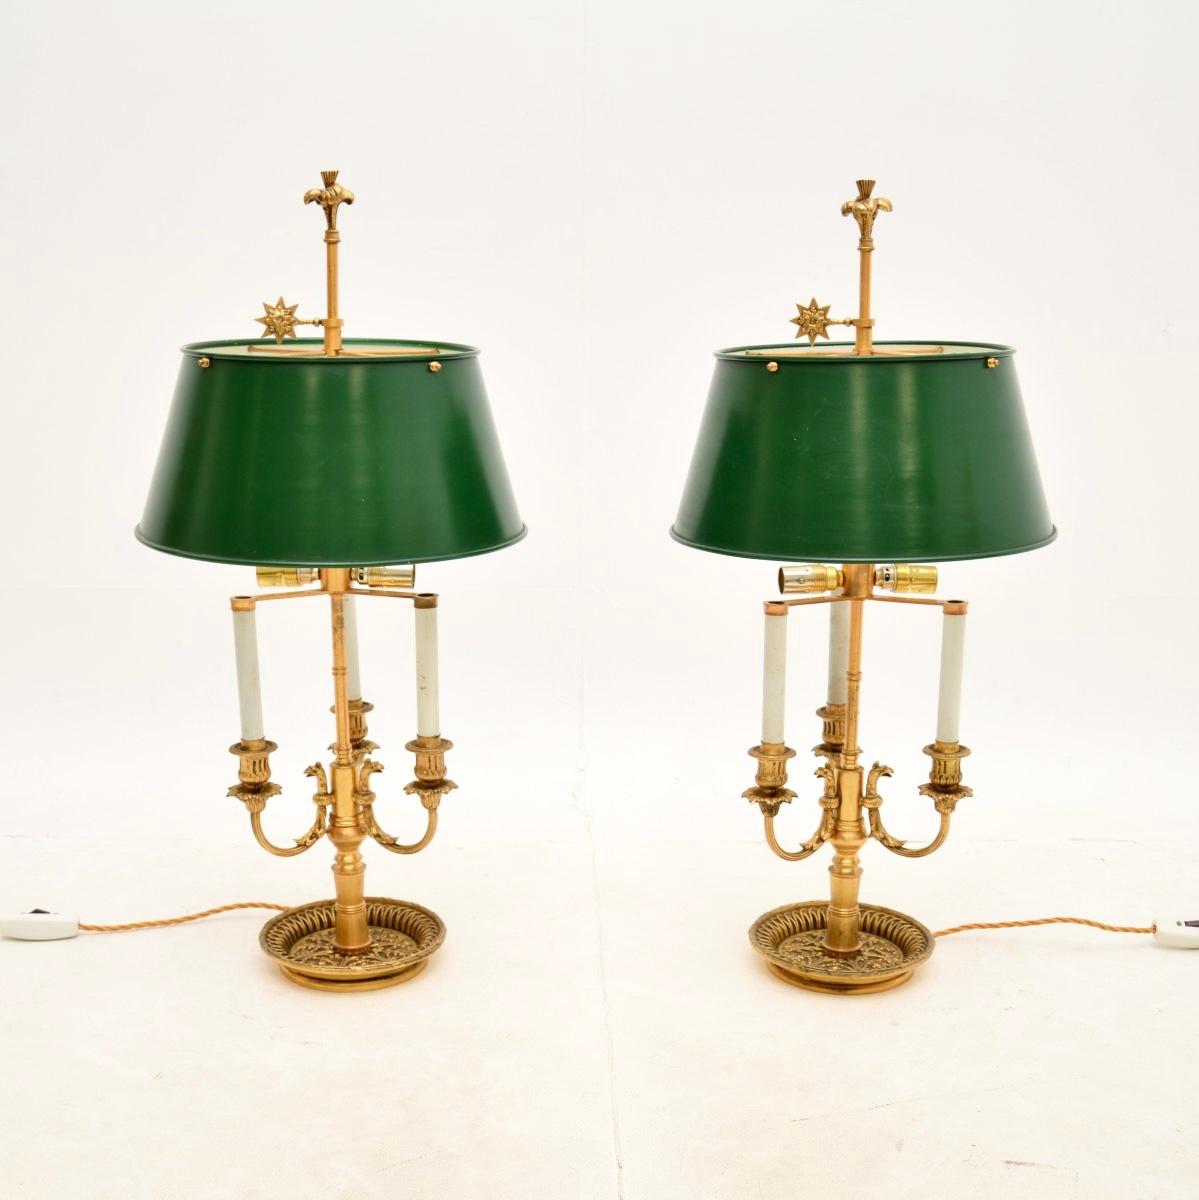 Neoclassical Pair of Antique Brass Table Lamps with Tole Shades For Sale